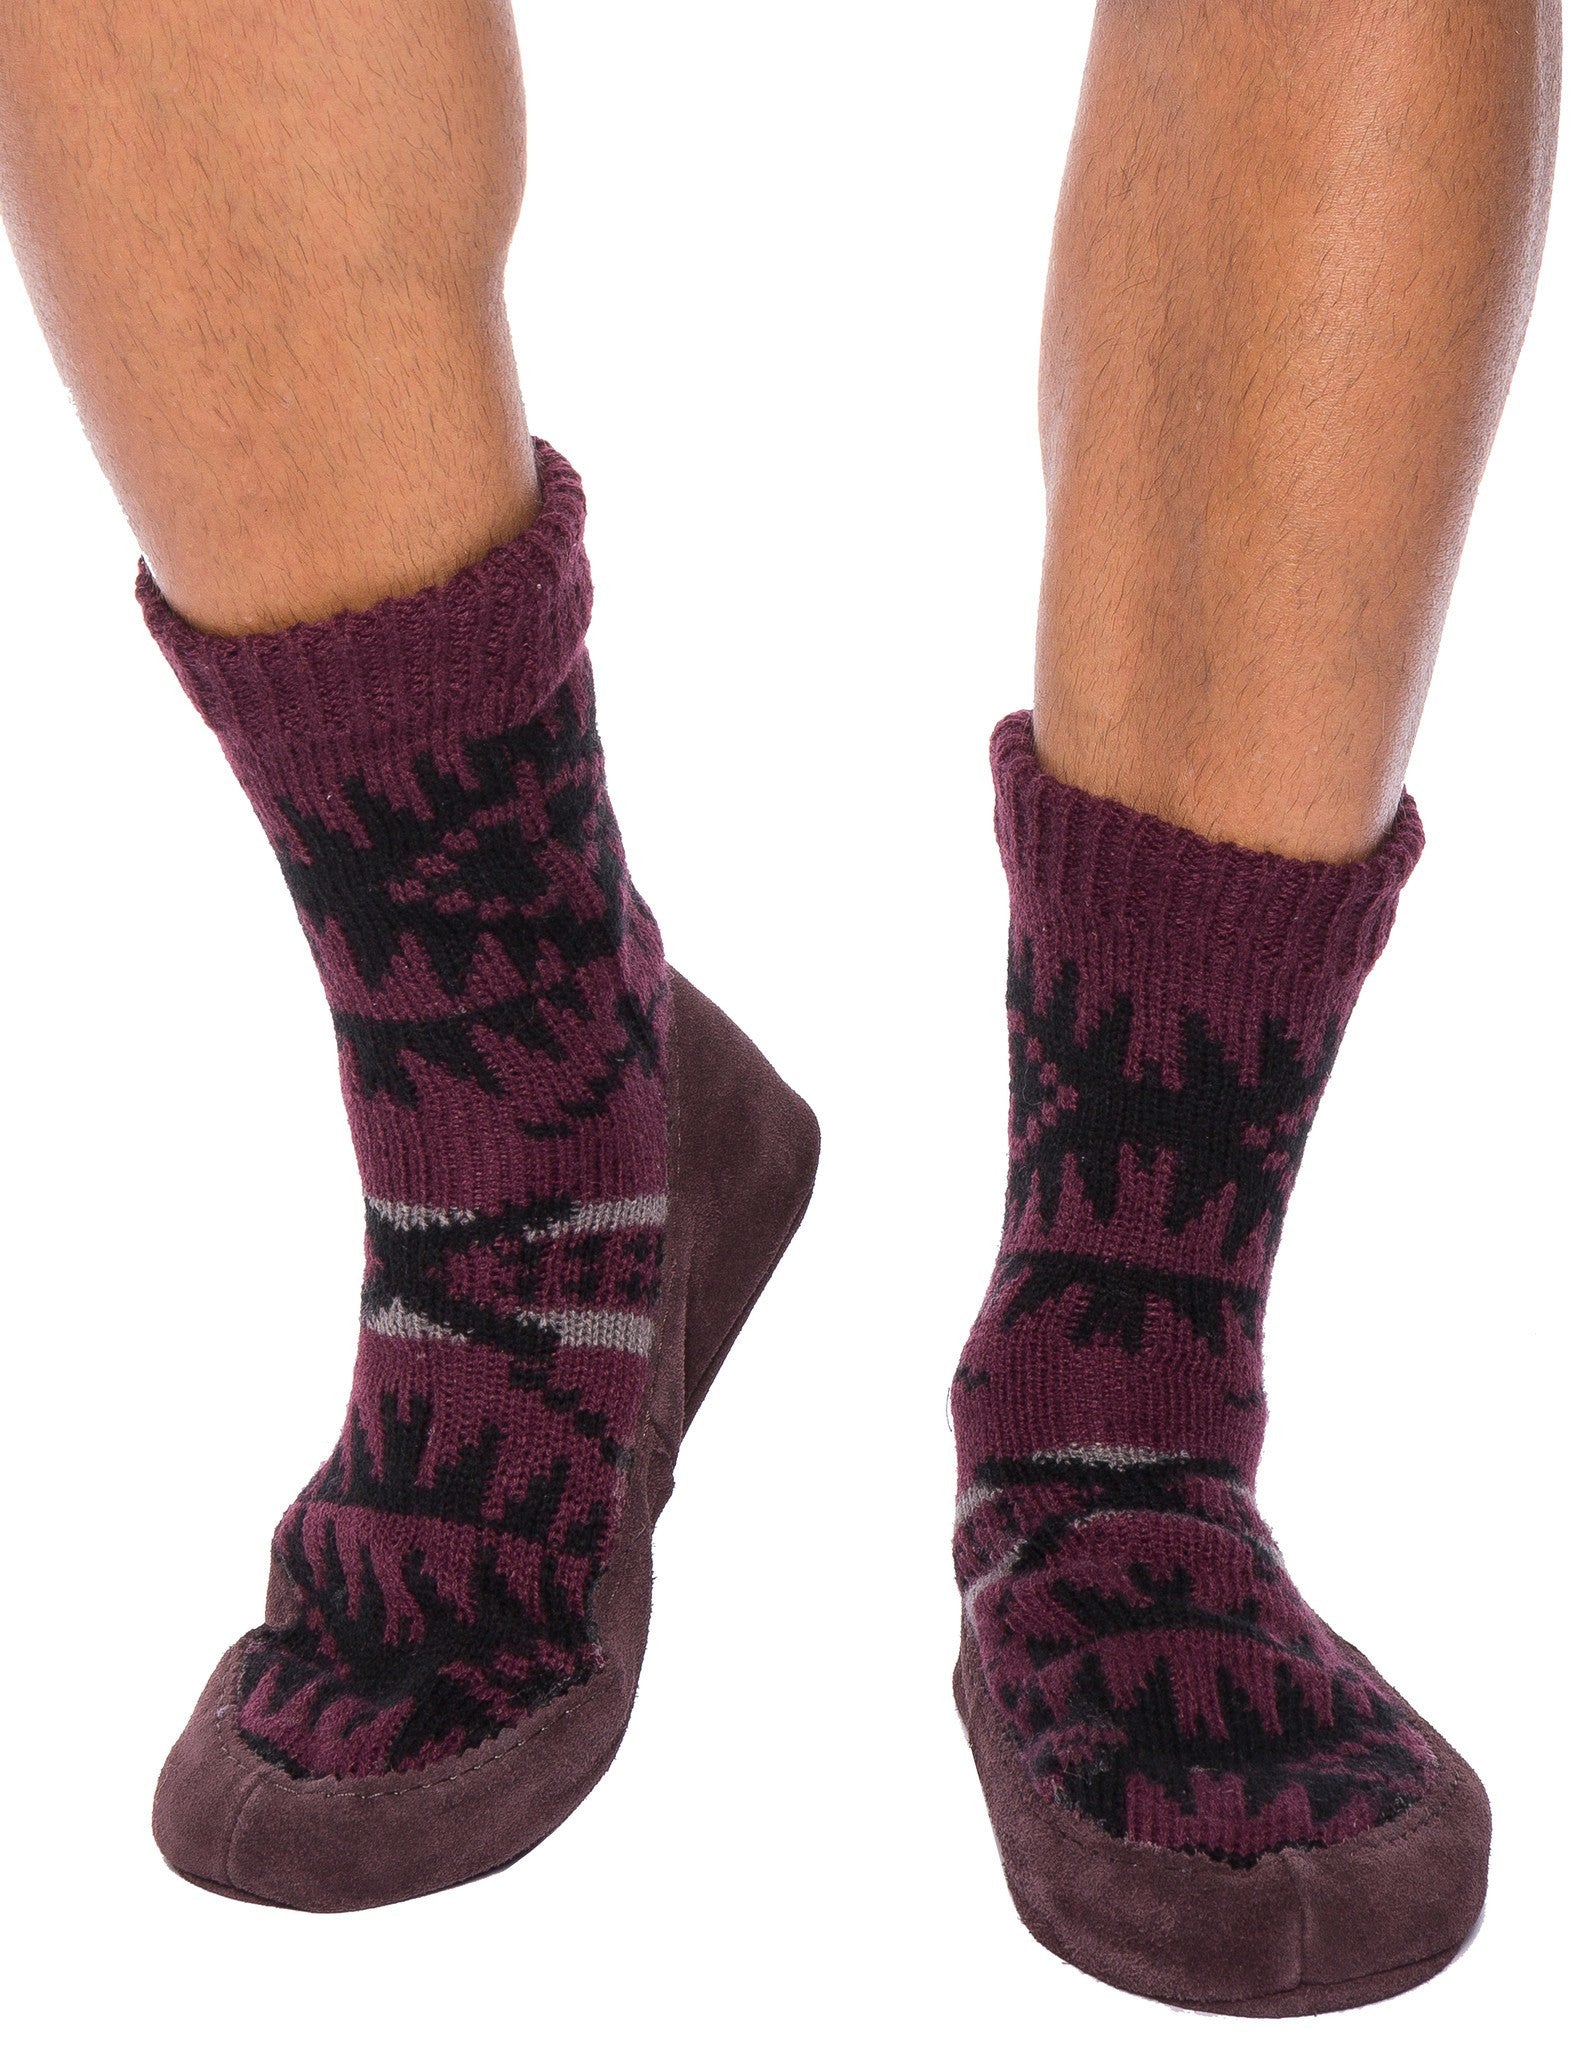 Men's Knit Moccassin Style Slipper Socks with Suede Sole